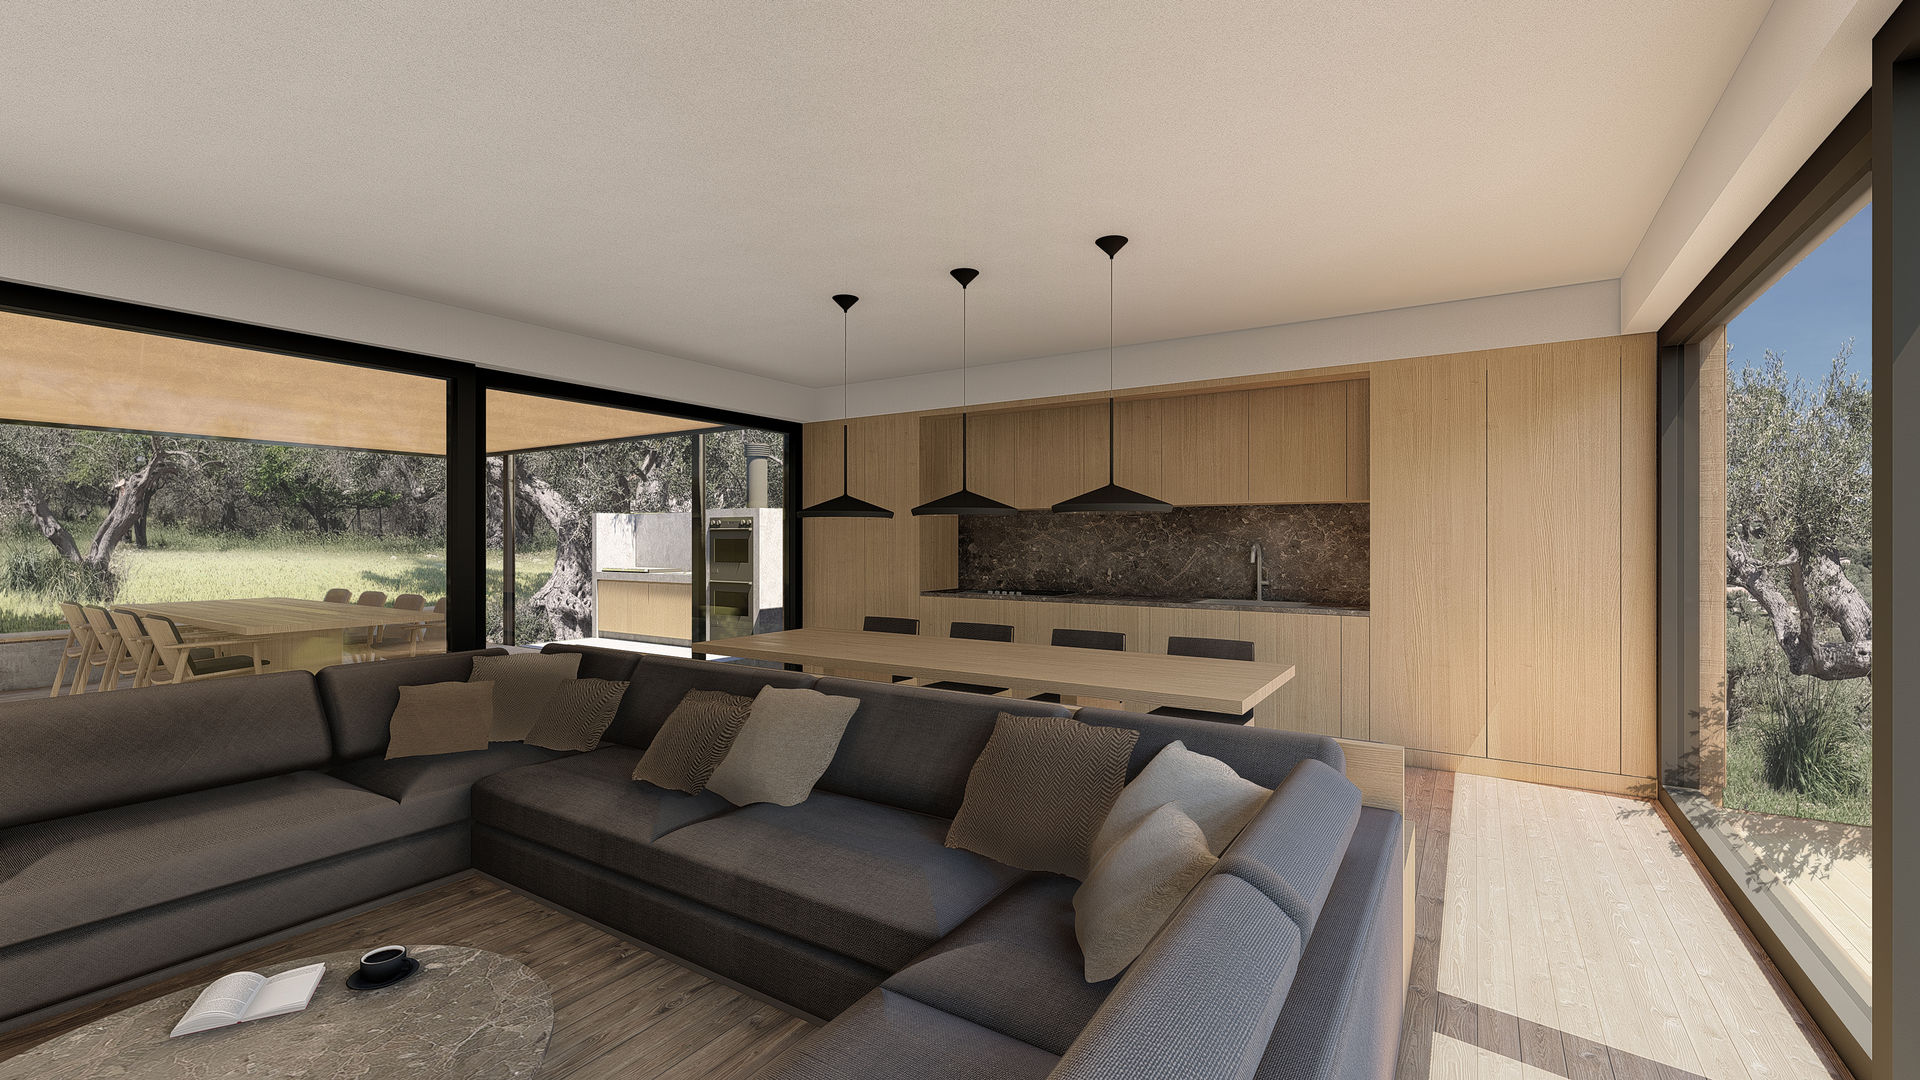 WOODEN HOUSE G|C – SICILY, ALESSIO LO BELLO ARCHITETTO a Palermo ALESSIO LO BELLO ARCHITETTO a Palermo Built-in kitchens Wood Wood effect durmast kitchen, wooden table, table lamps, couch, olive tree grove, wooden house, country house